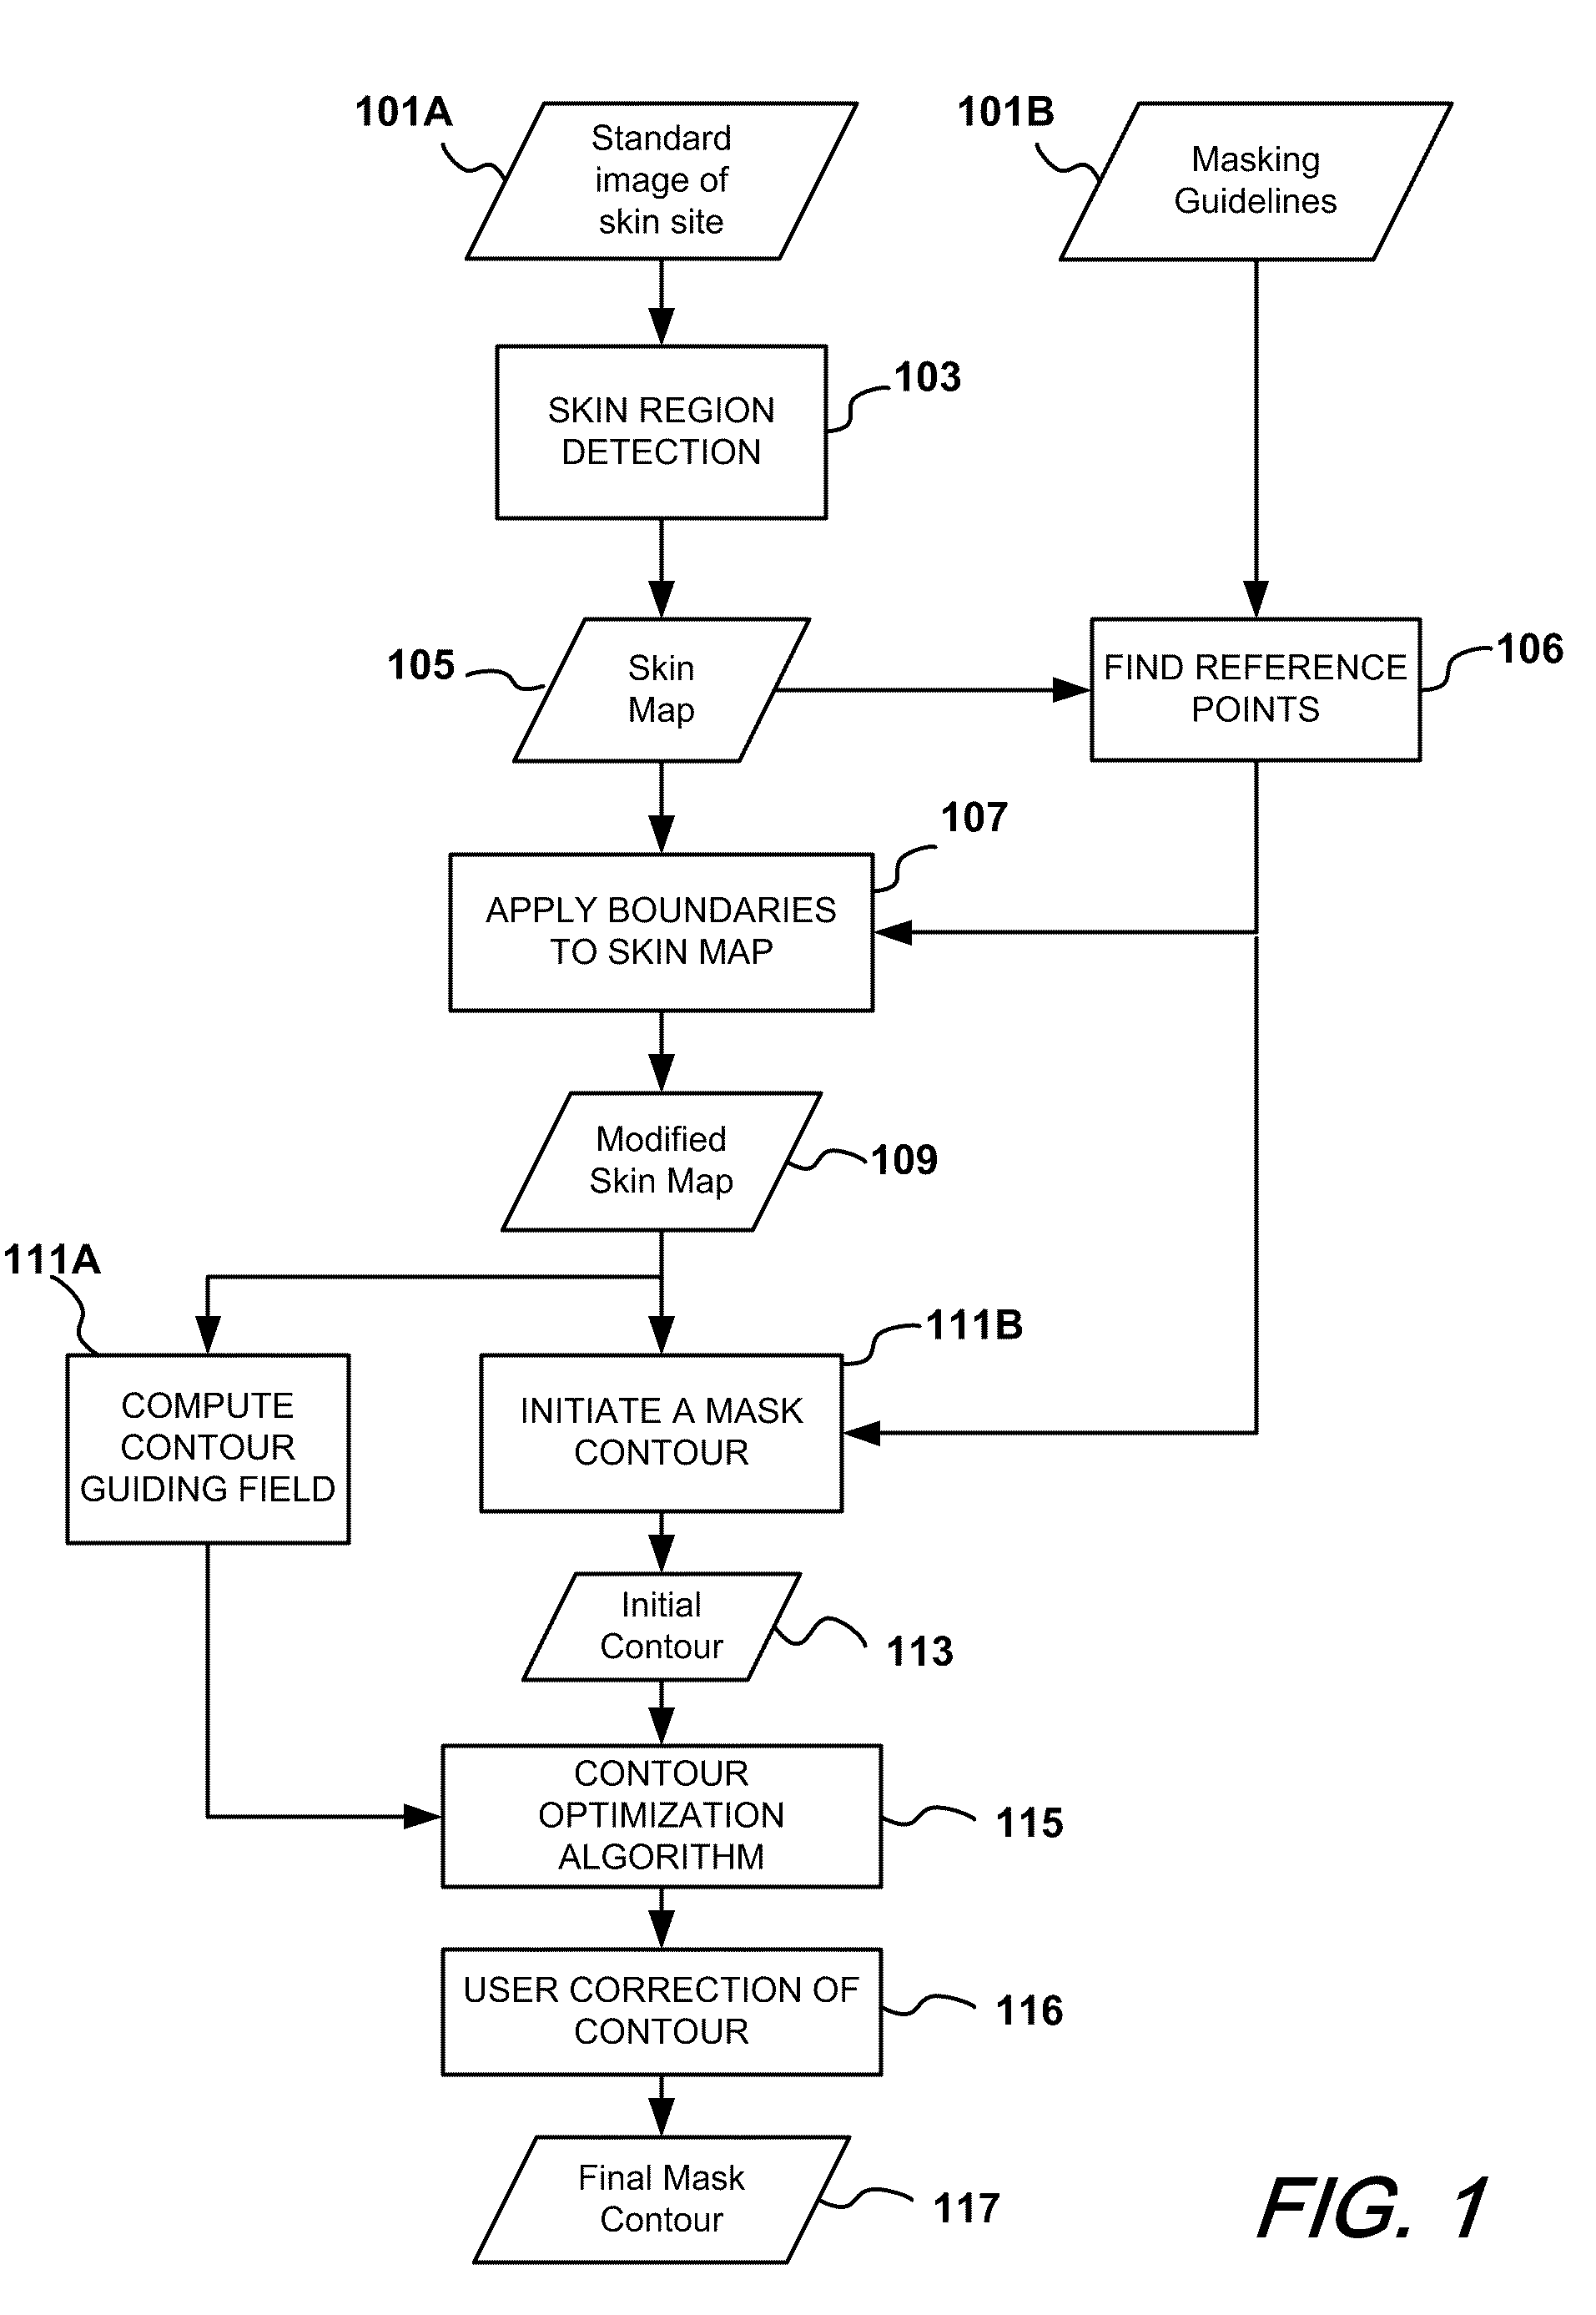 Automatic mask design and registration and feature detection for computer-aided skin analysis